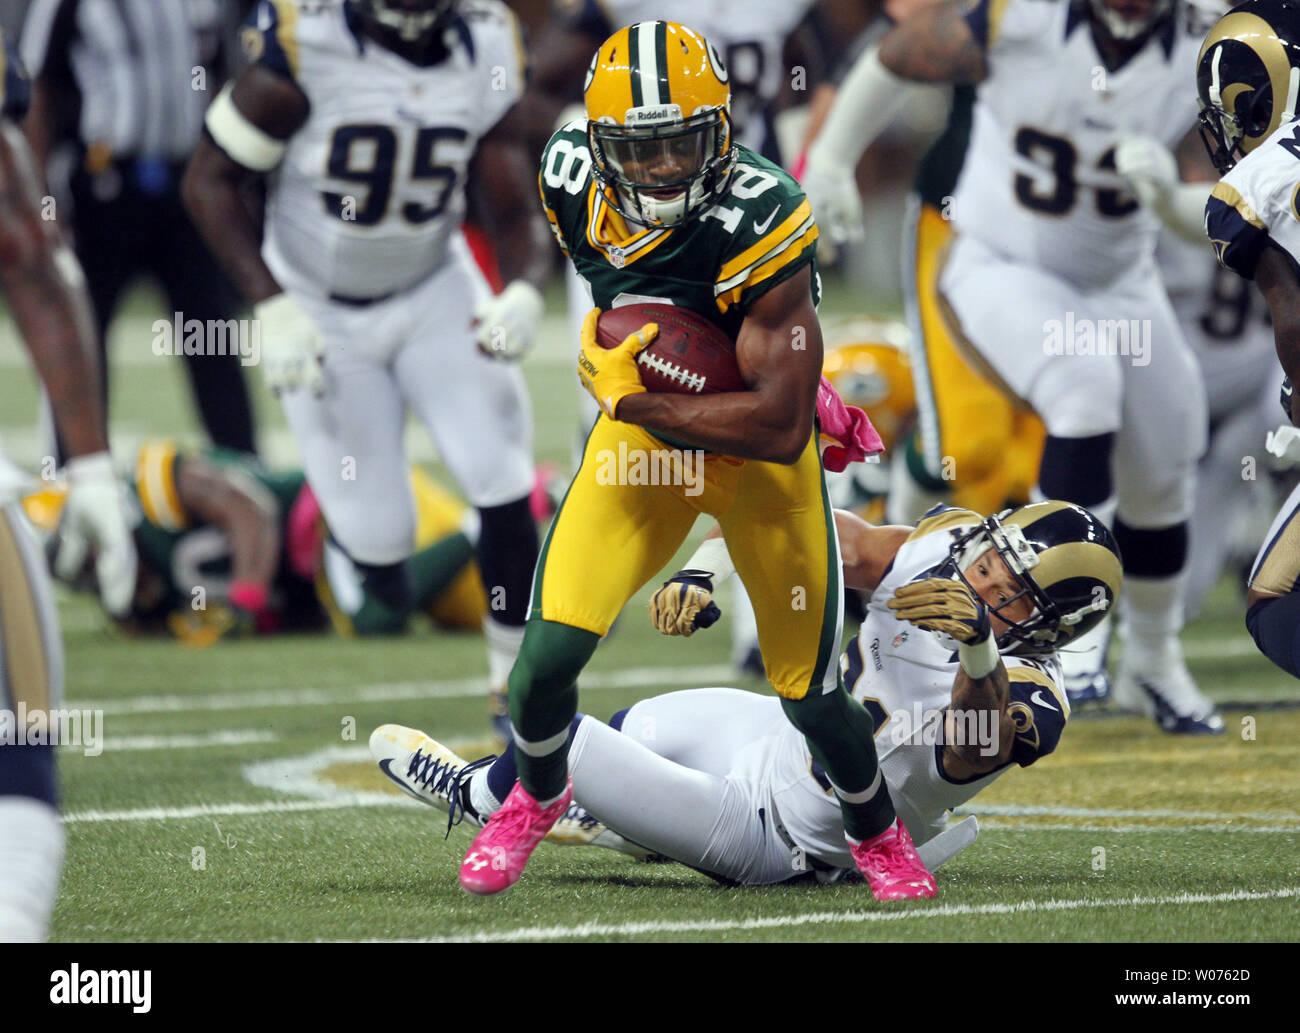 Green Bay Packers Randall Cobb runs past the St. Louis Rams defense during the second quarter at the Edward Jones Dome in St. Louis on October 21, 2012.  Green Bay won the game 30-20.   UPI/Bill Greenblatt Stock Photo